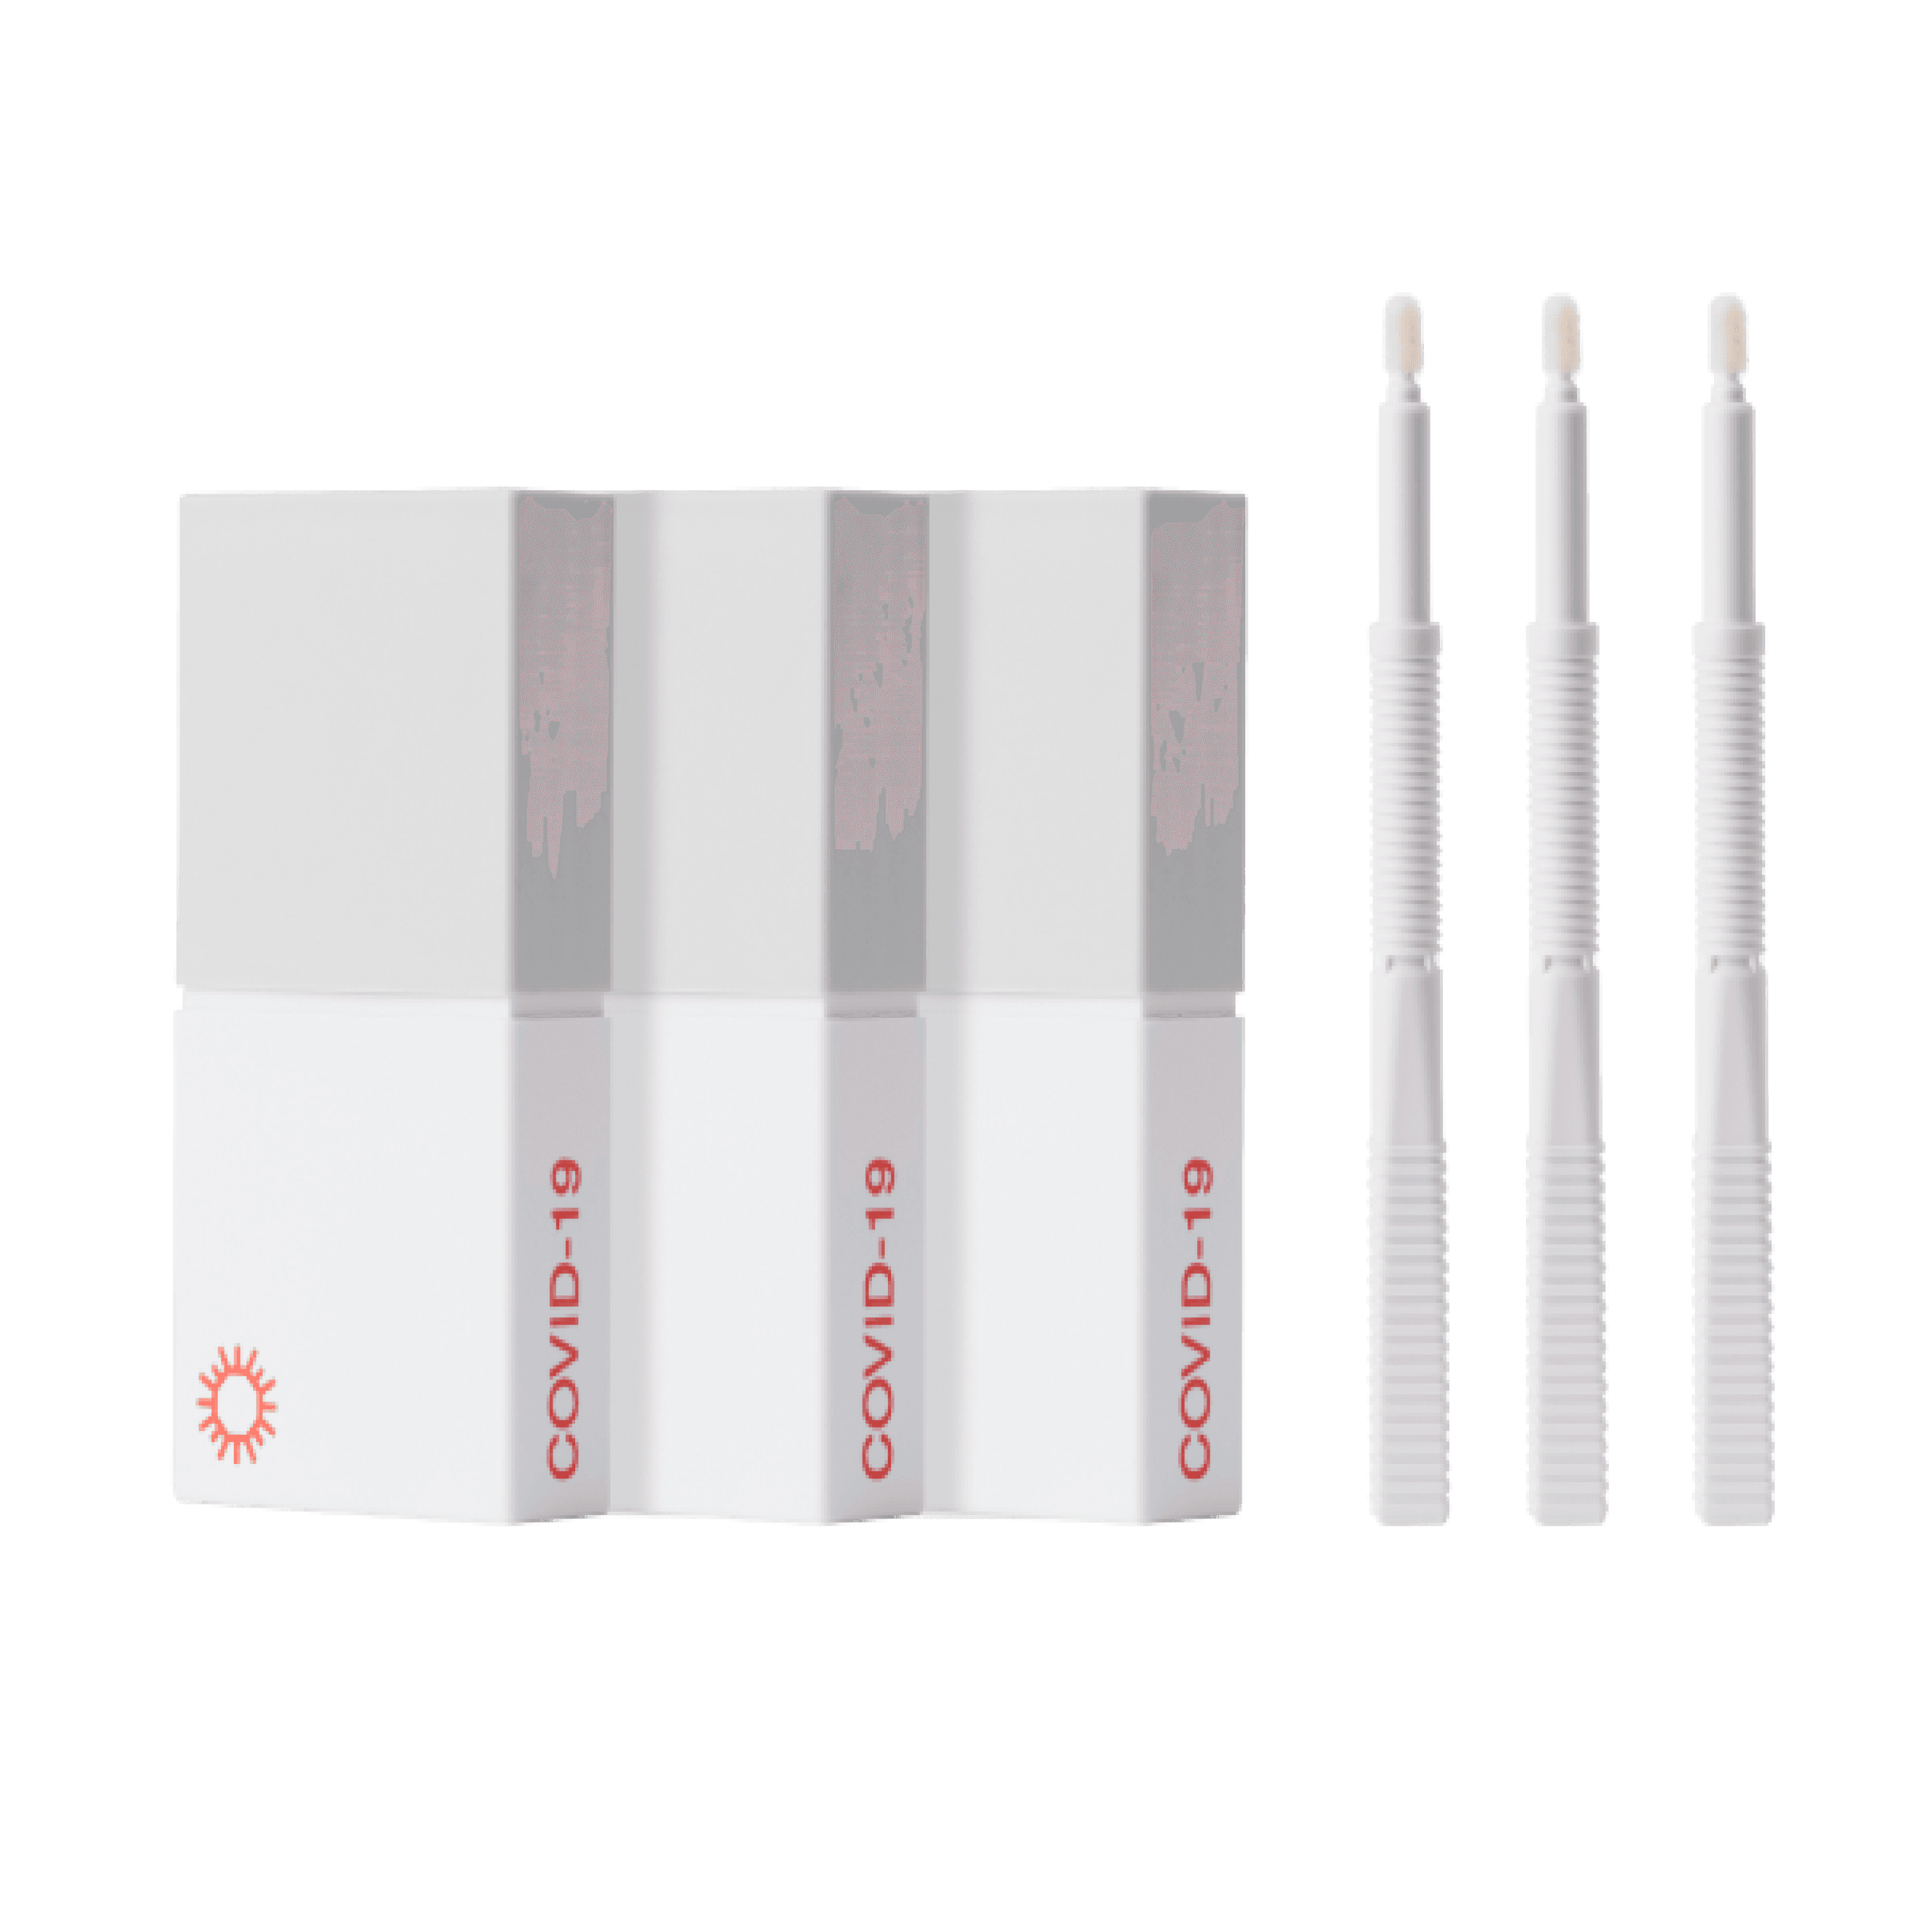 COVID-19 Tests - 3 Pack